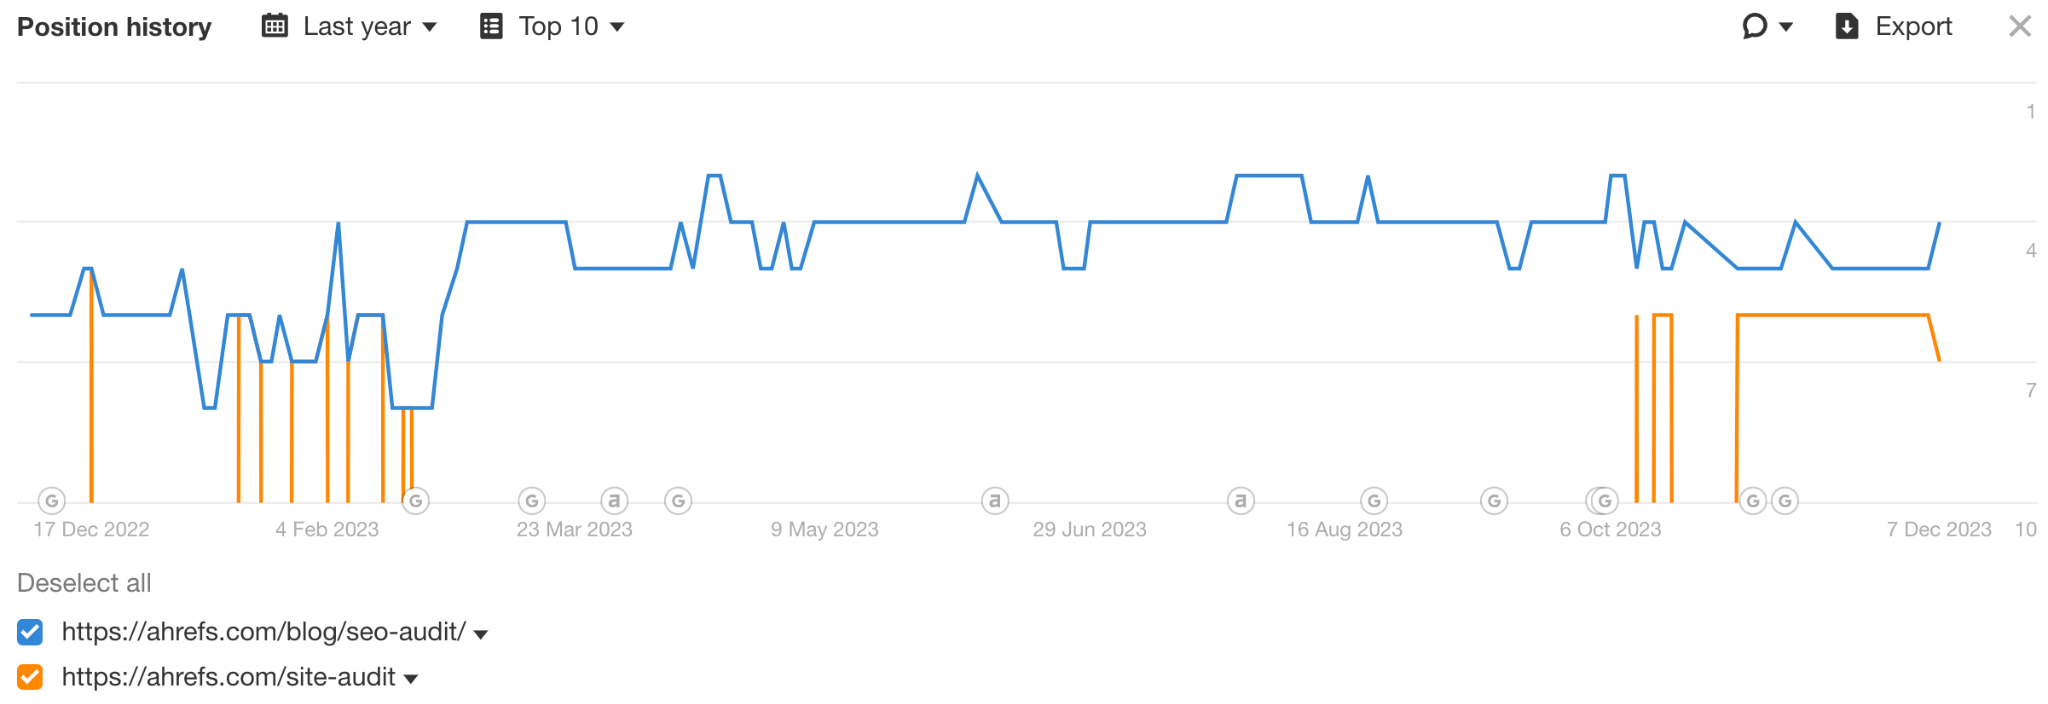 Position history for "seo audit". 